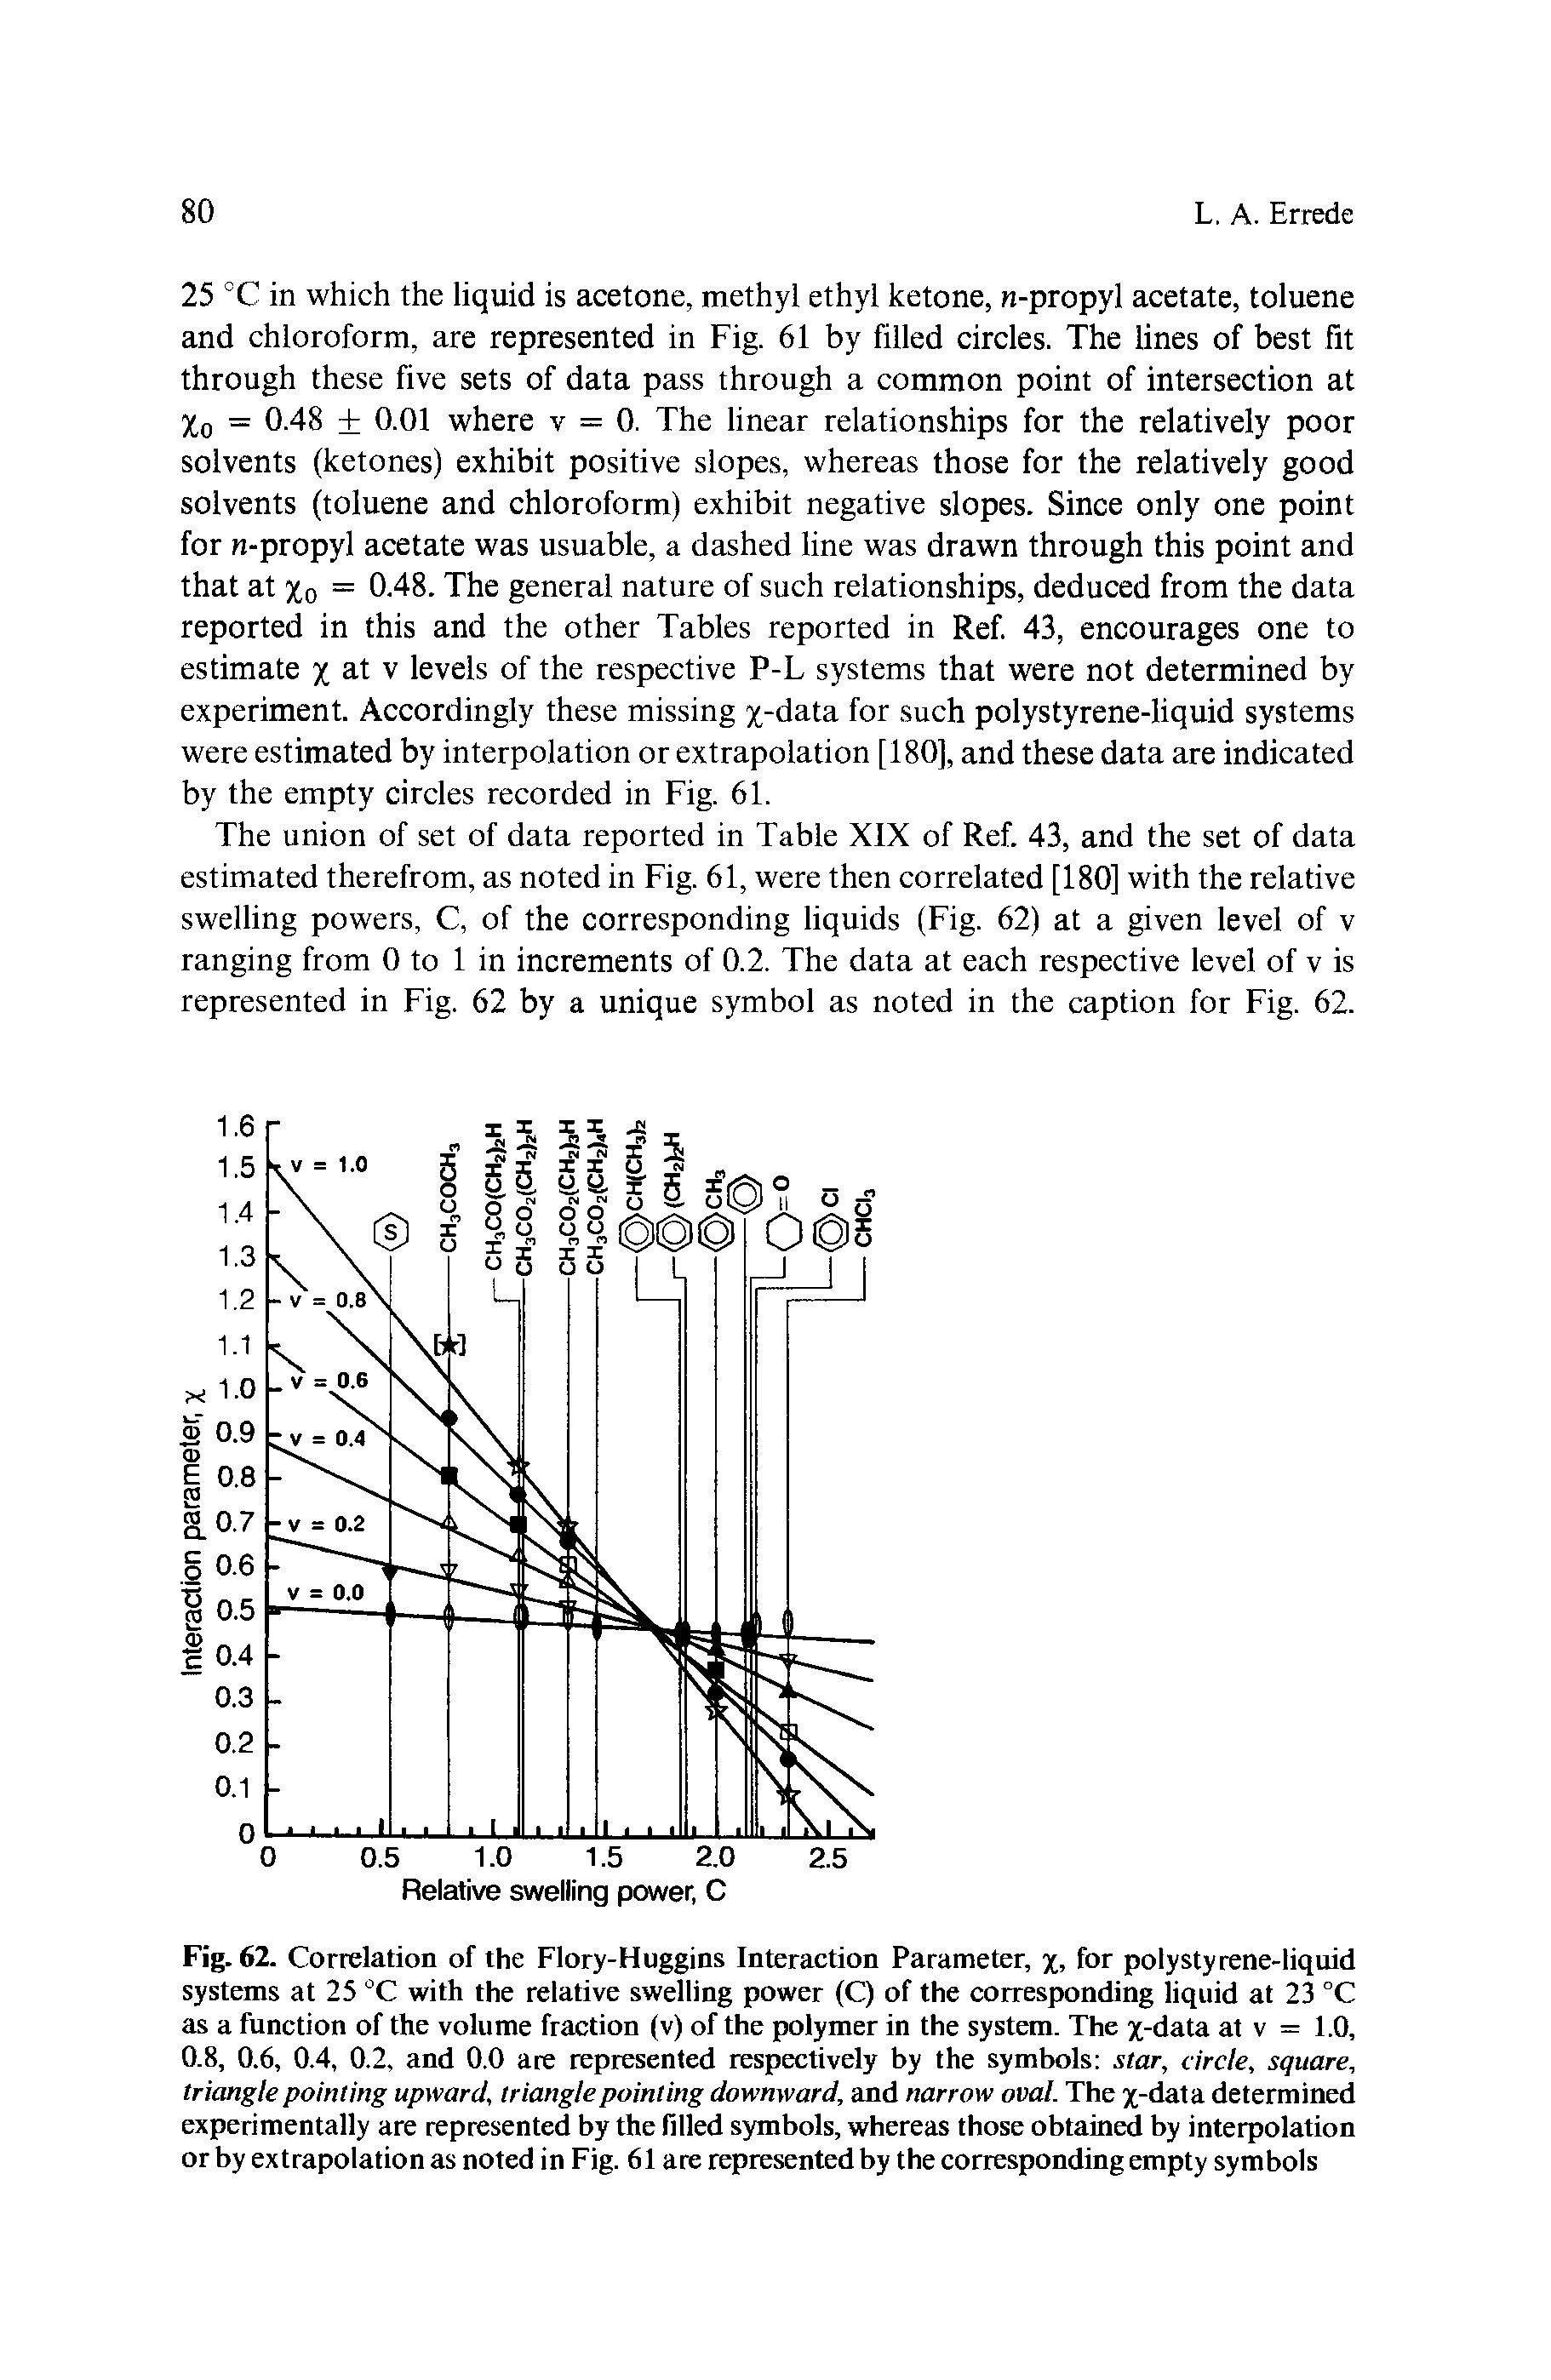 Fig. 62. Correlation of the Flory-Huggins Interaction Parameter, /, for polystyrene-liquid systems at 25 °C with the relative swelling power (C) of the corresponding liquid at 23 °C as a function of the volume fraction (v) of the polymer in the system. The /-data at v = 1.0, 0.8, 0.6, 0.4, 0.2, and 0.0 are represented respectively by the symbols star, circle, square, triangle pointing upward, triangle pointing downward, and narrow oval. The /-data determined experimentally are represented by the filled symbols, whereas those obtained by interpolation or by extrapolation as noted in Fig. 61 are represented by the corresponding empty symbols...